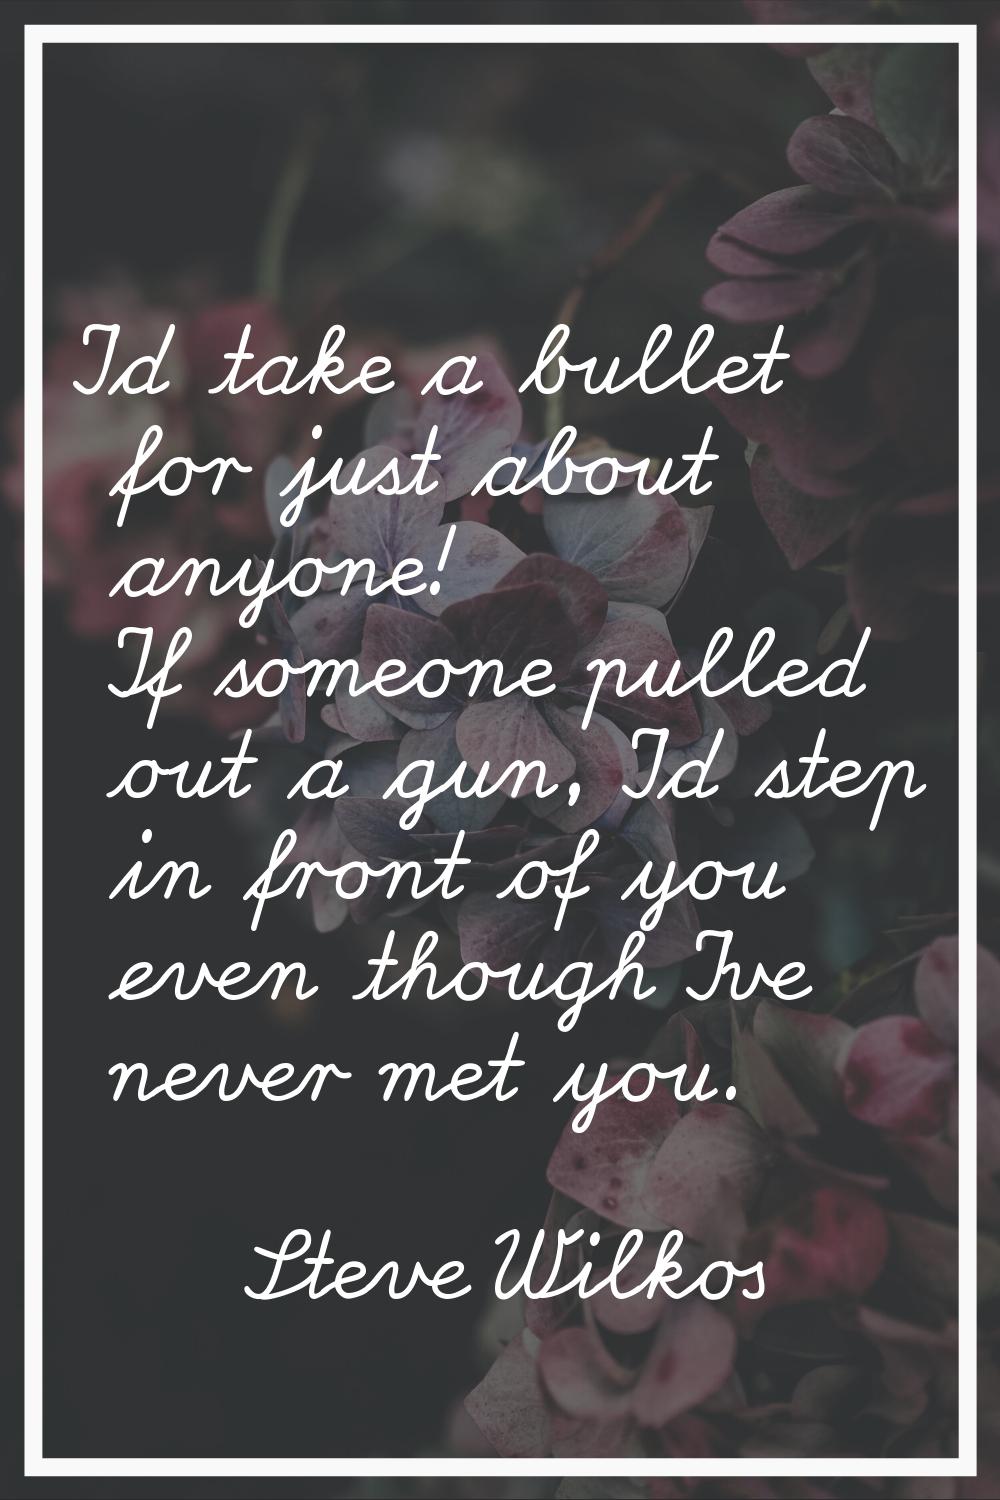 I'd take a bullet for just about anyone! If someone pulled out a gun, I'd step in front of you even